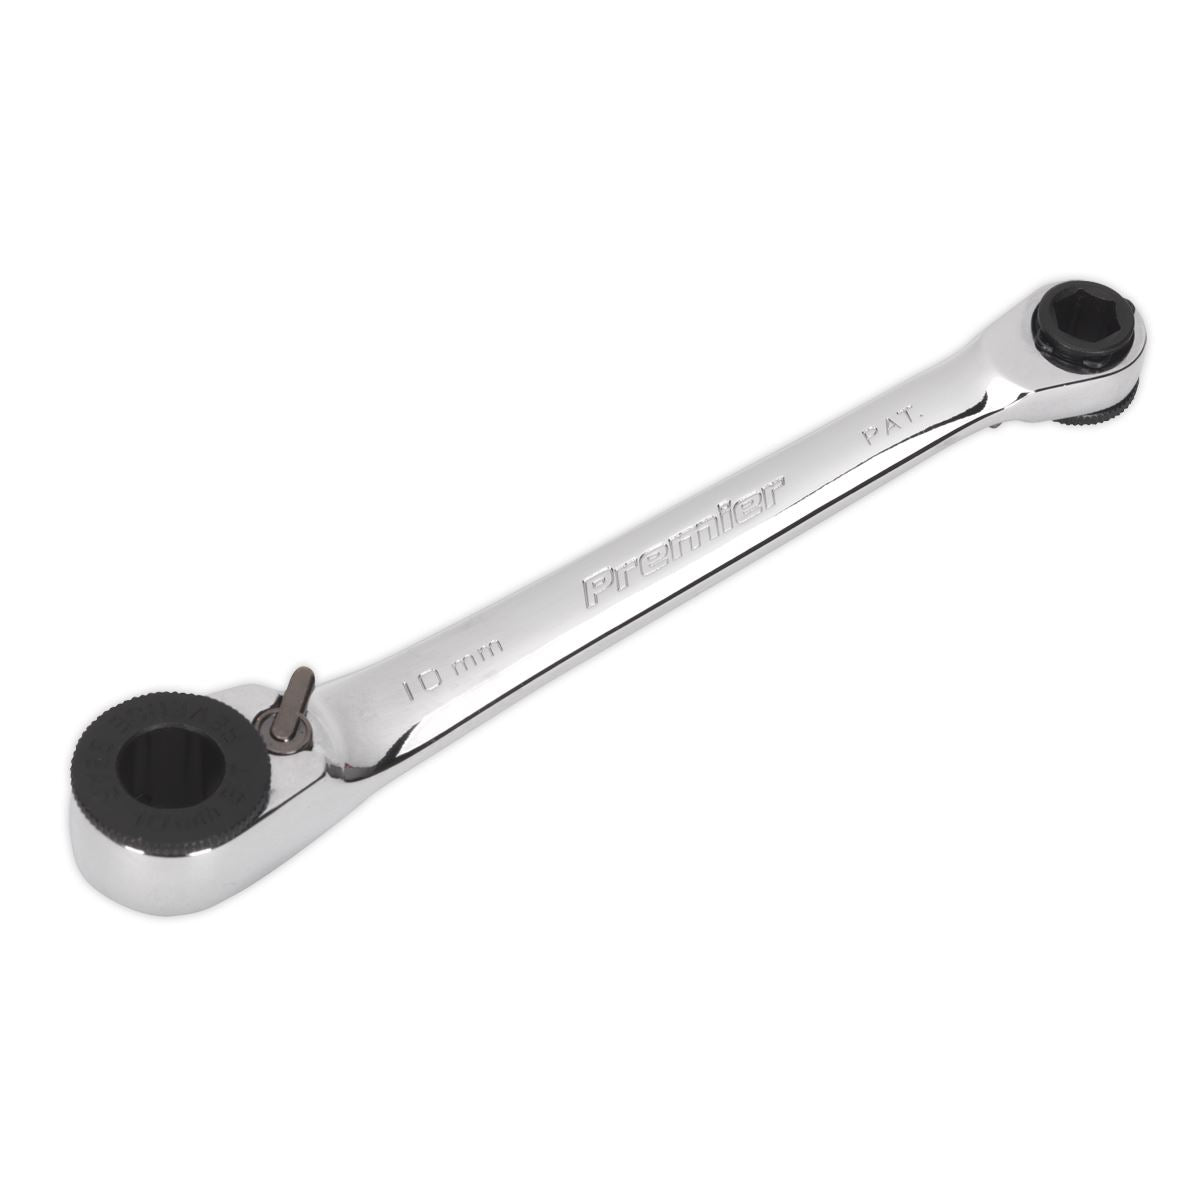 Sealey 1/4" Hex x 10mm Hex Reversible Ratchet Spanner 72 Tooth